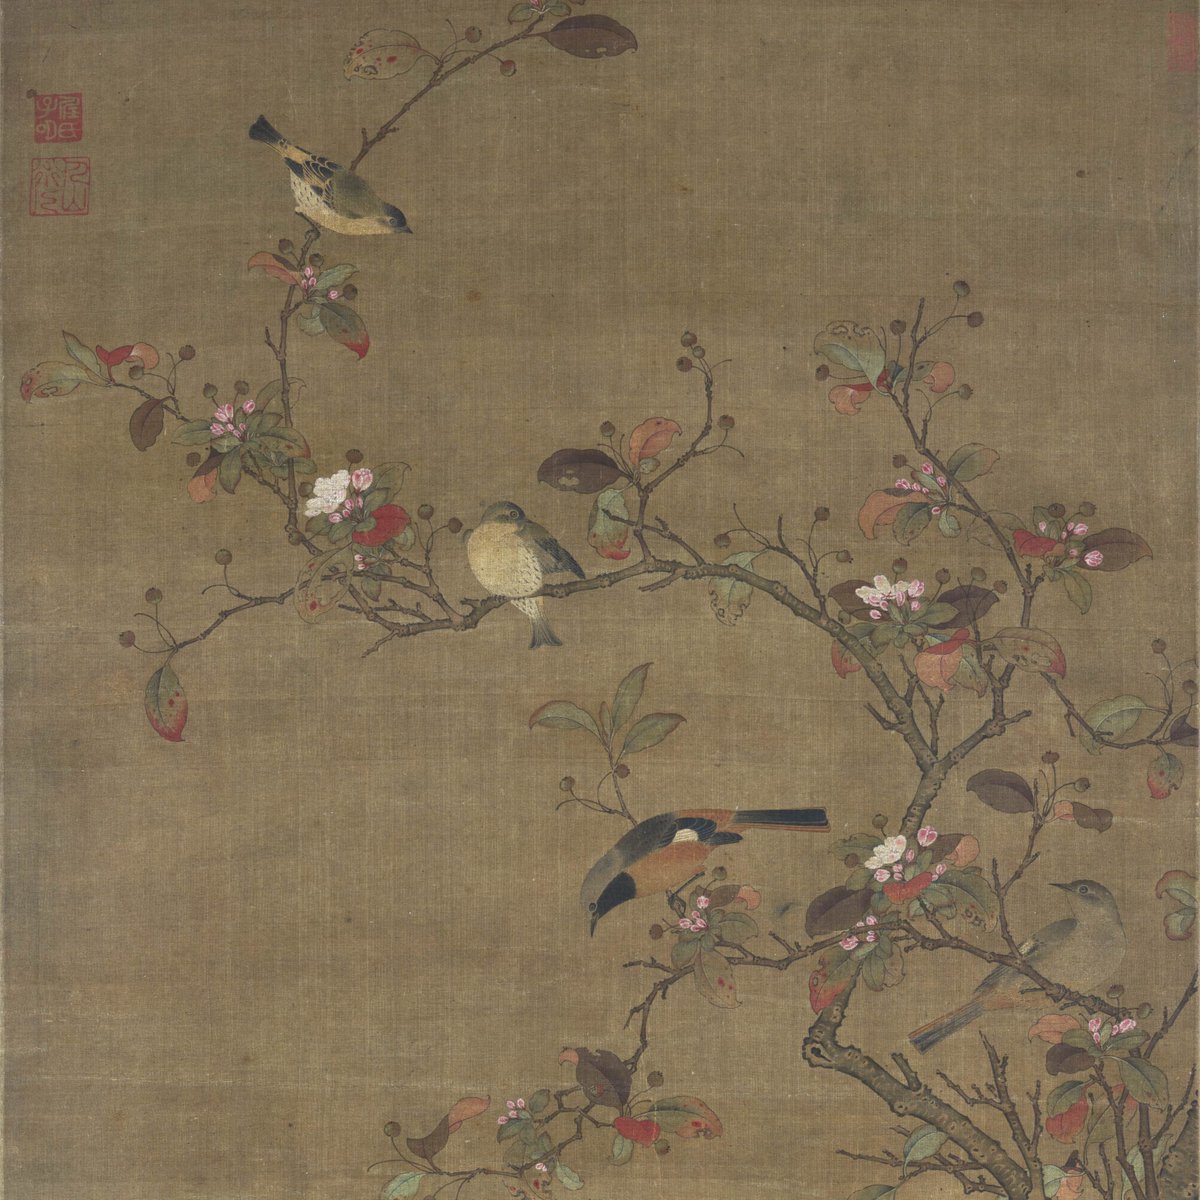 #FridayFlowers

Ren Renfa (1254–1327) is not only an expert in water conservancy, but also a talented painter.

In this scroll, he depicts two ducks frolicing by a lake. Above them, several birds perch on the slanting branches of haitang flowers🌼. What a harmonious autumn scene!